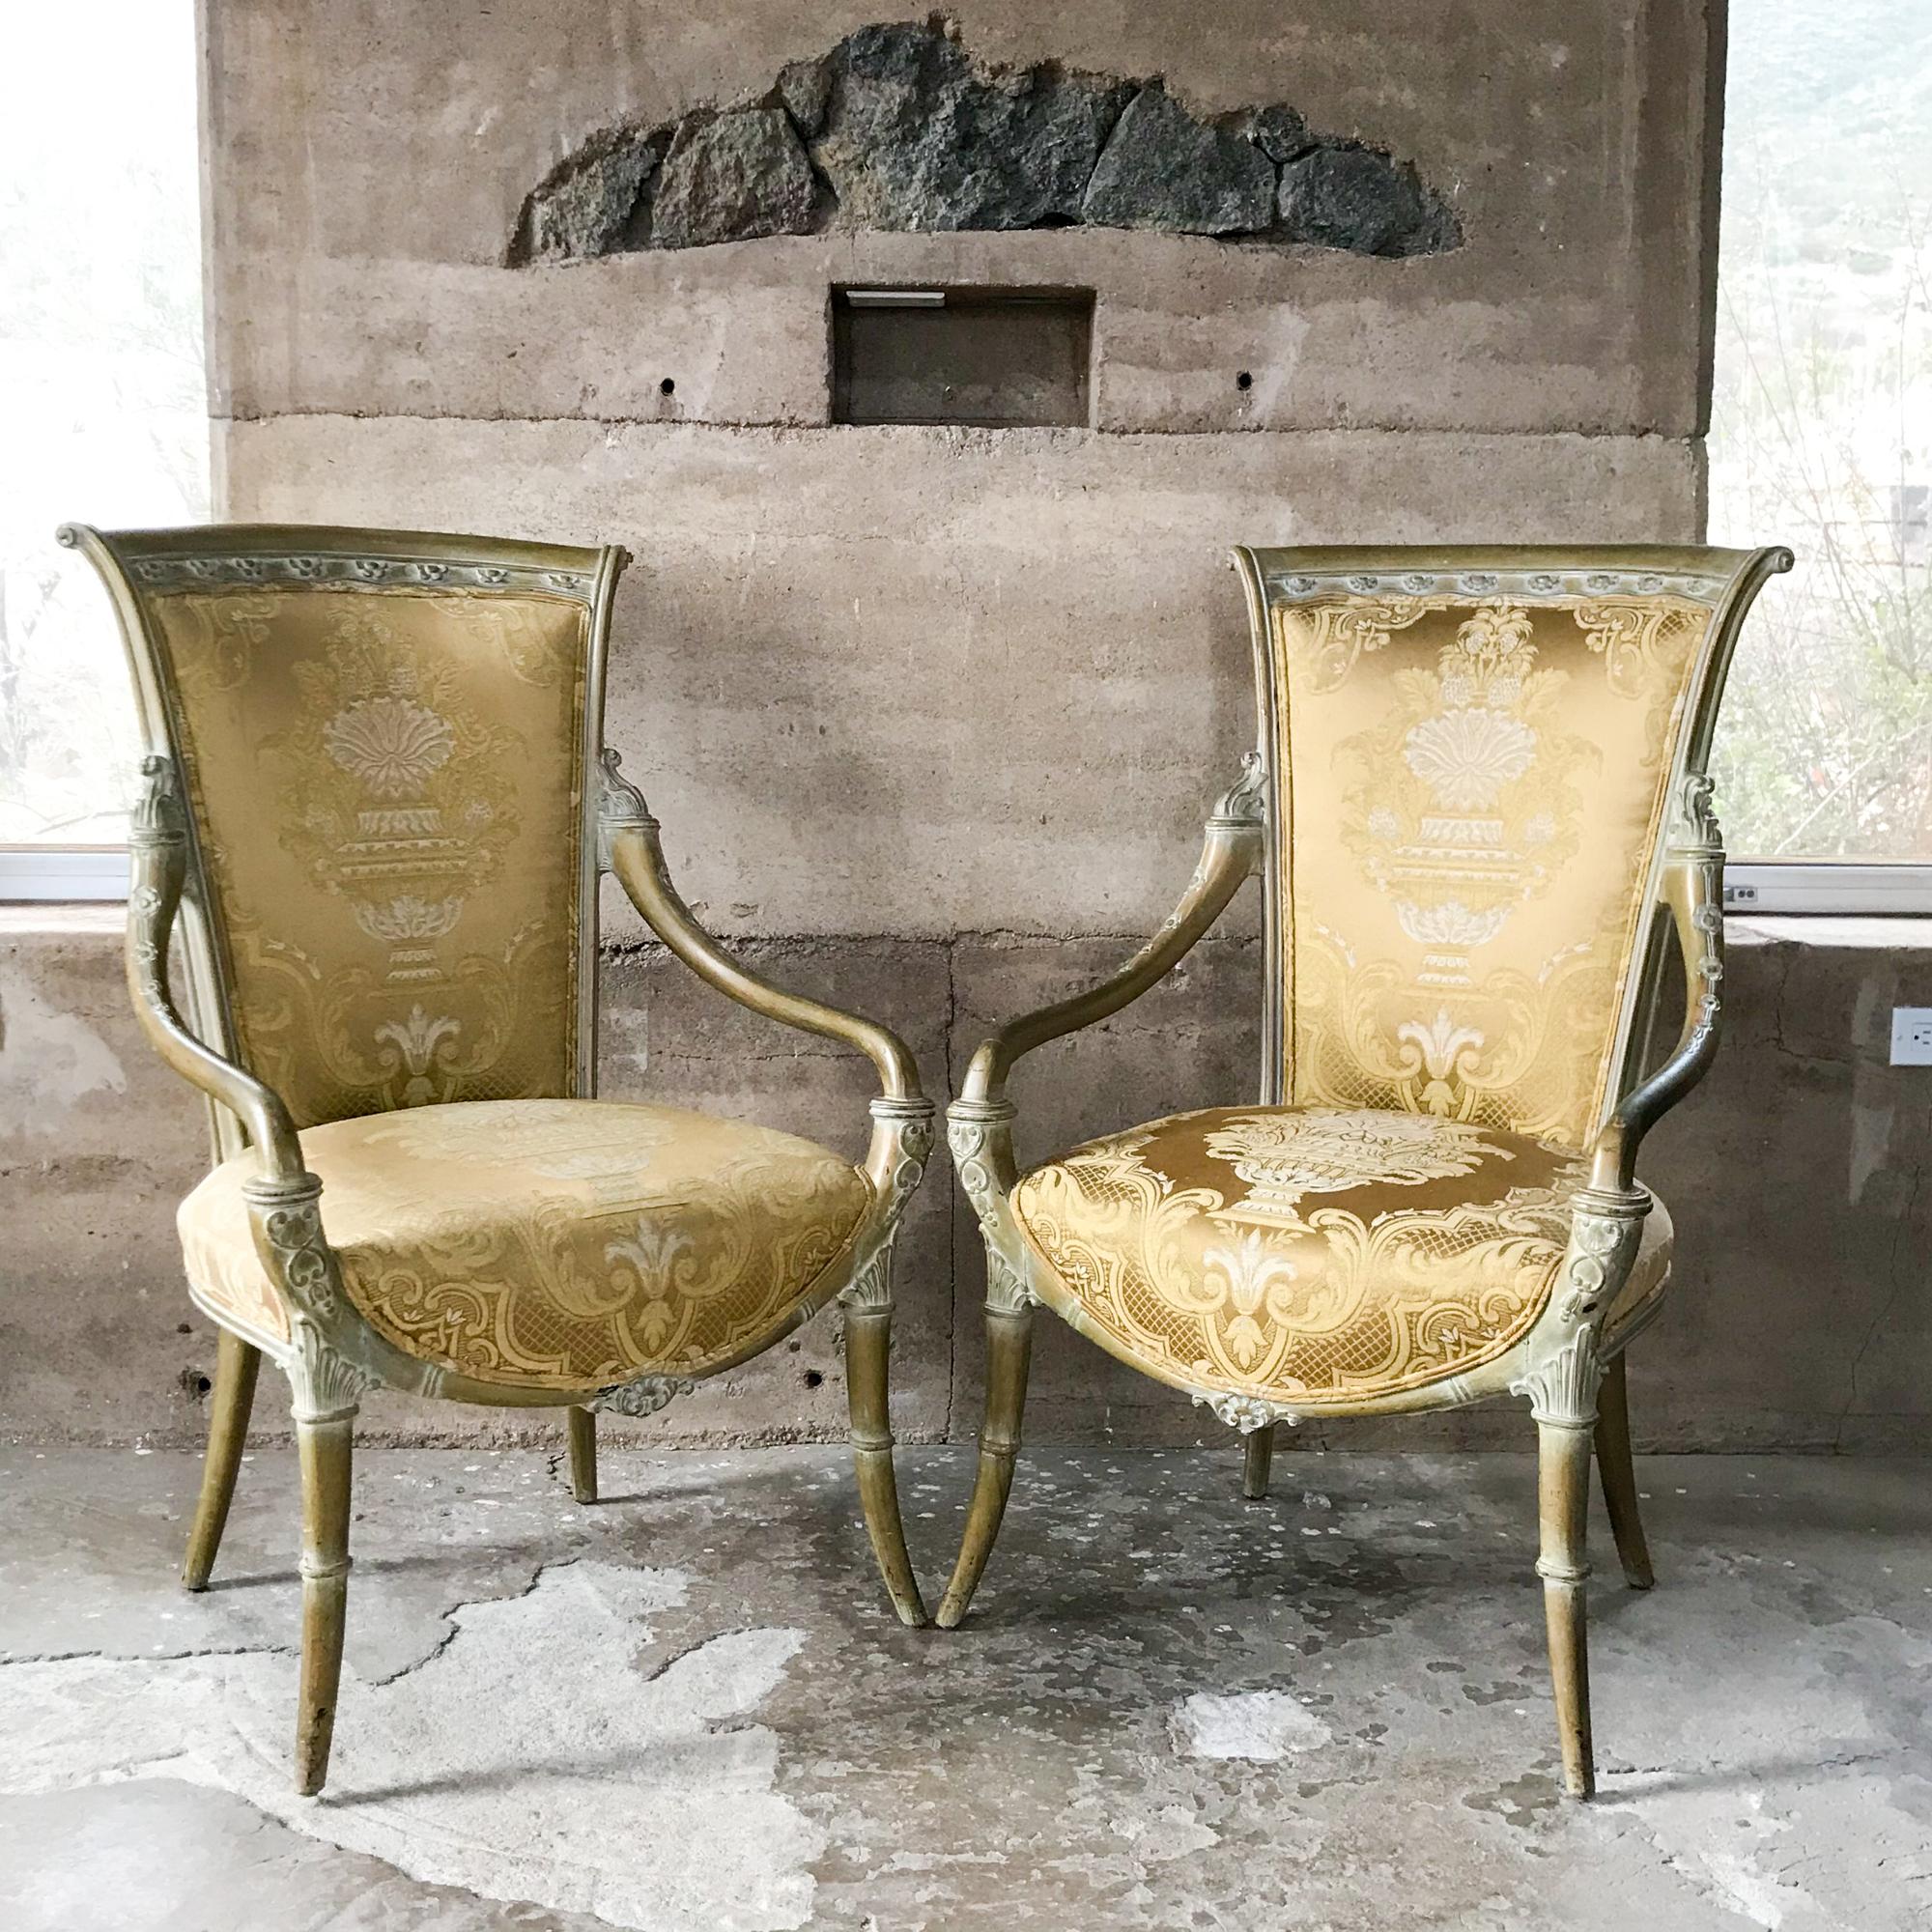 Armchairs
Pair of Italian Regency Armchairs, Louis XV period.
Hand carved Mahogany Wood with Original Gold Leaf Whitewash Finish. 
Curvy elegant lines. Exquisite detail. These are fabulous. In the style of Maison Jansen.
Spring Cushion System. Silk